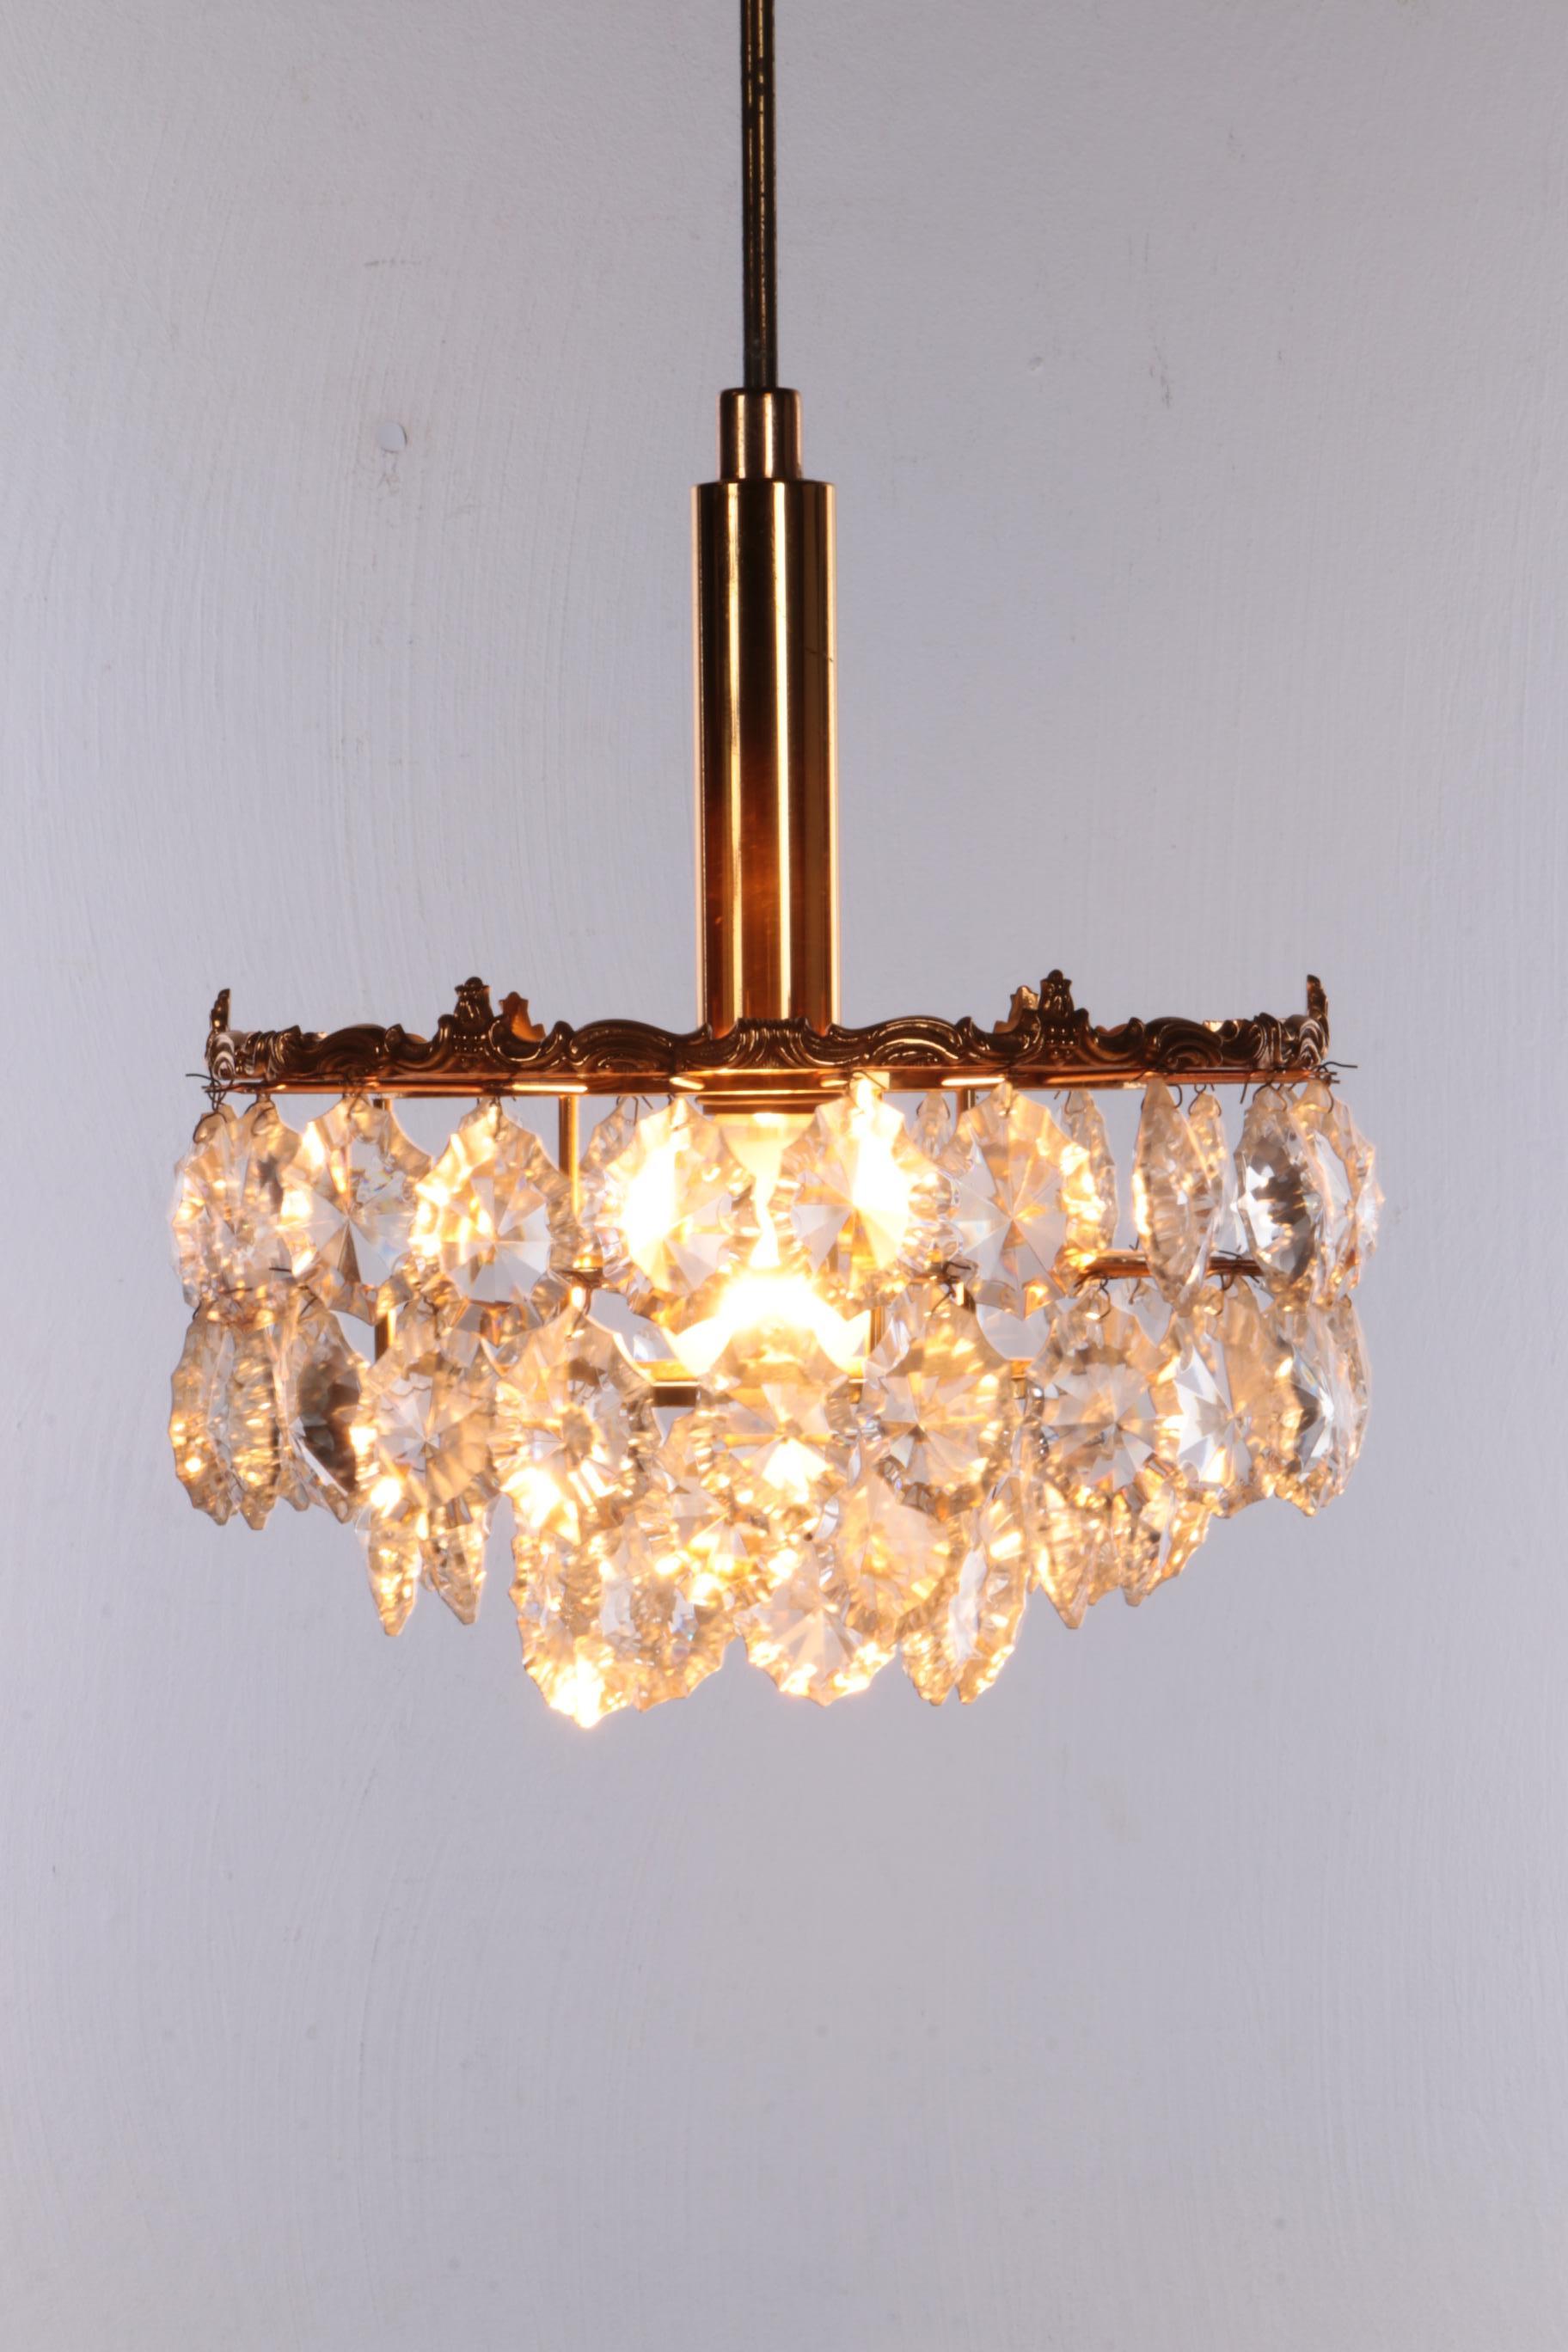 Mid-20th Century Vintage Chandelier Design by Christoph Palme, 1960 Germany For Sale